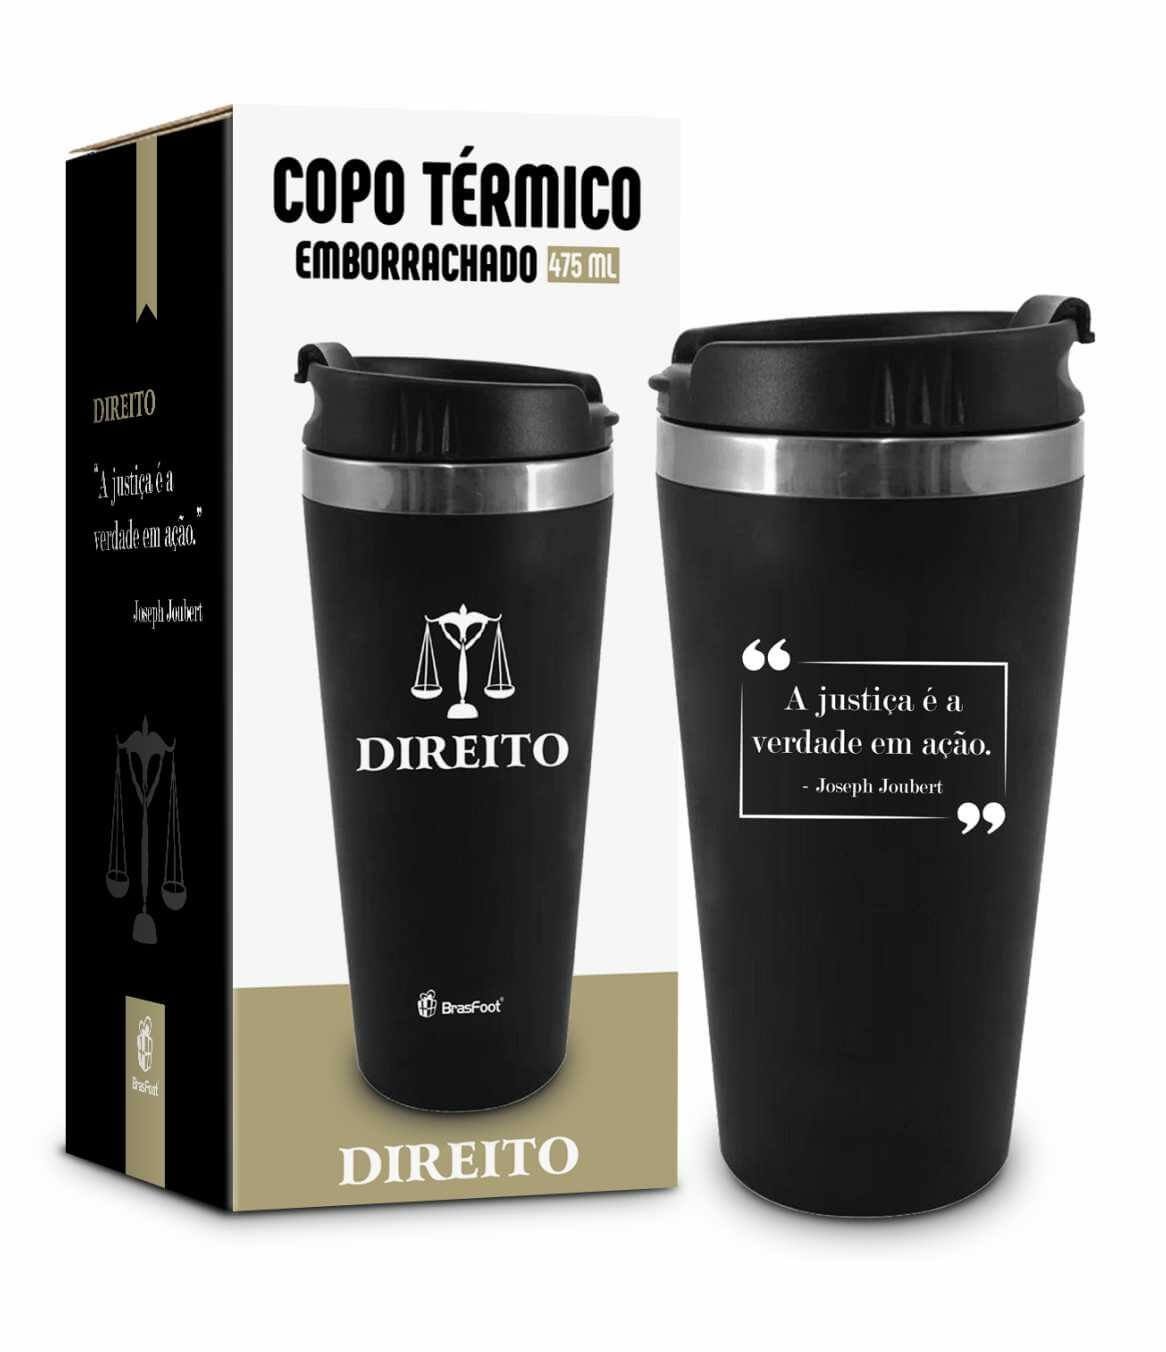 ptl-288-04-thermal_cup_course-direito_3d.jpg